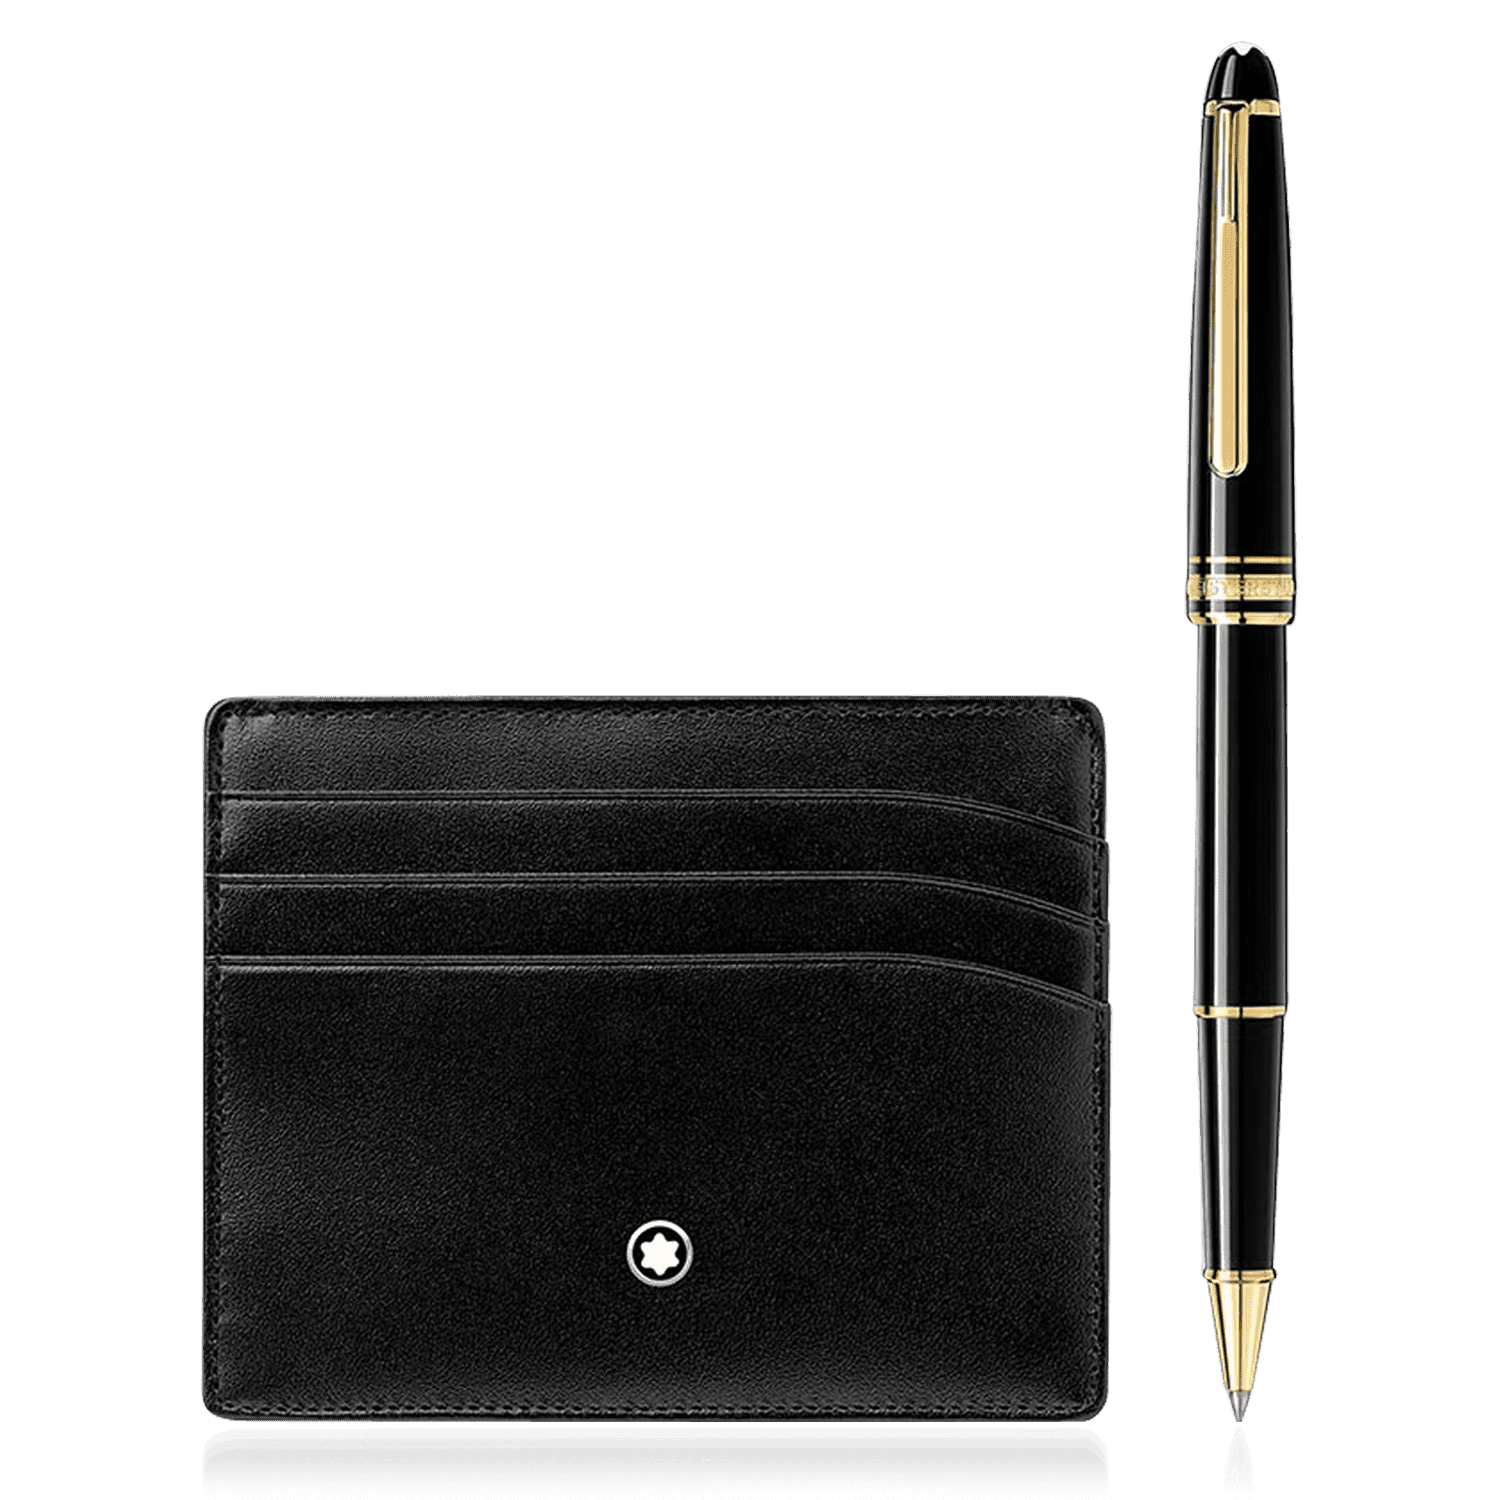 Gift Set with Meisterstück Classique Rollerball and pocket holder 6cc